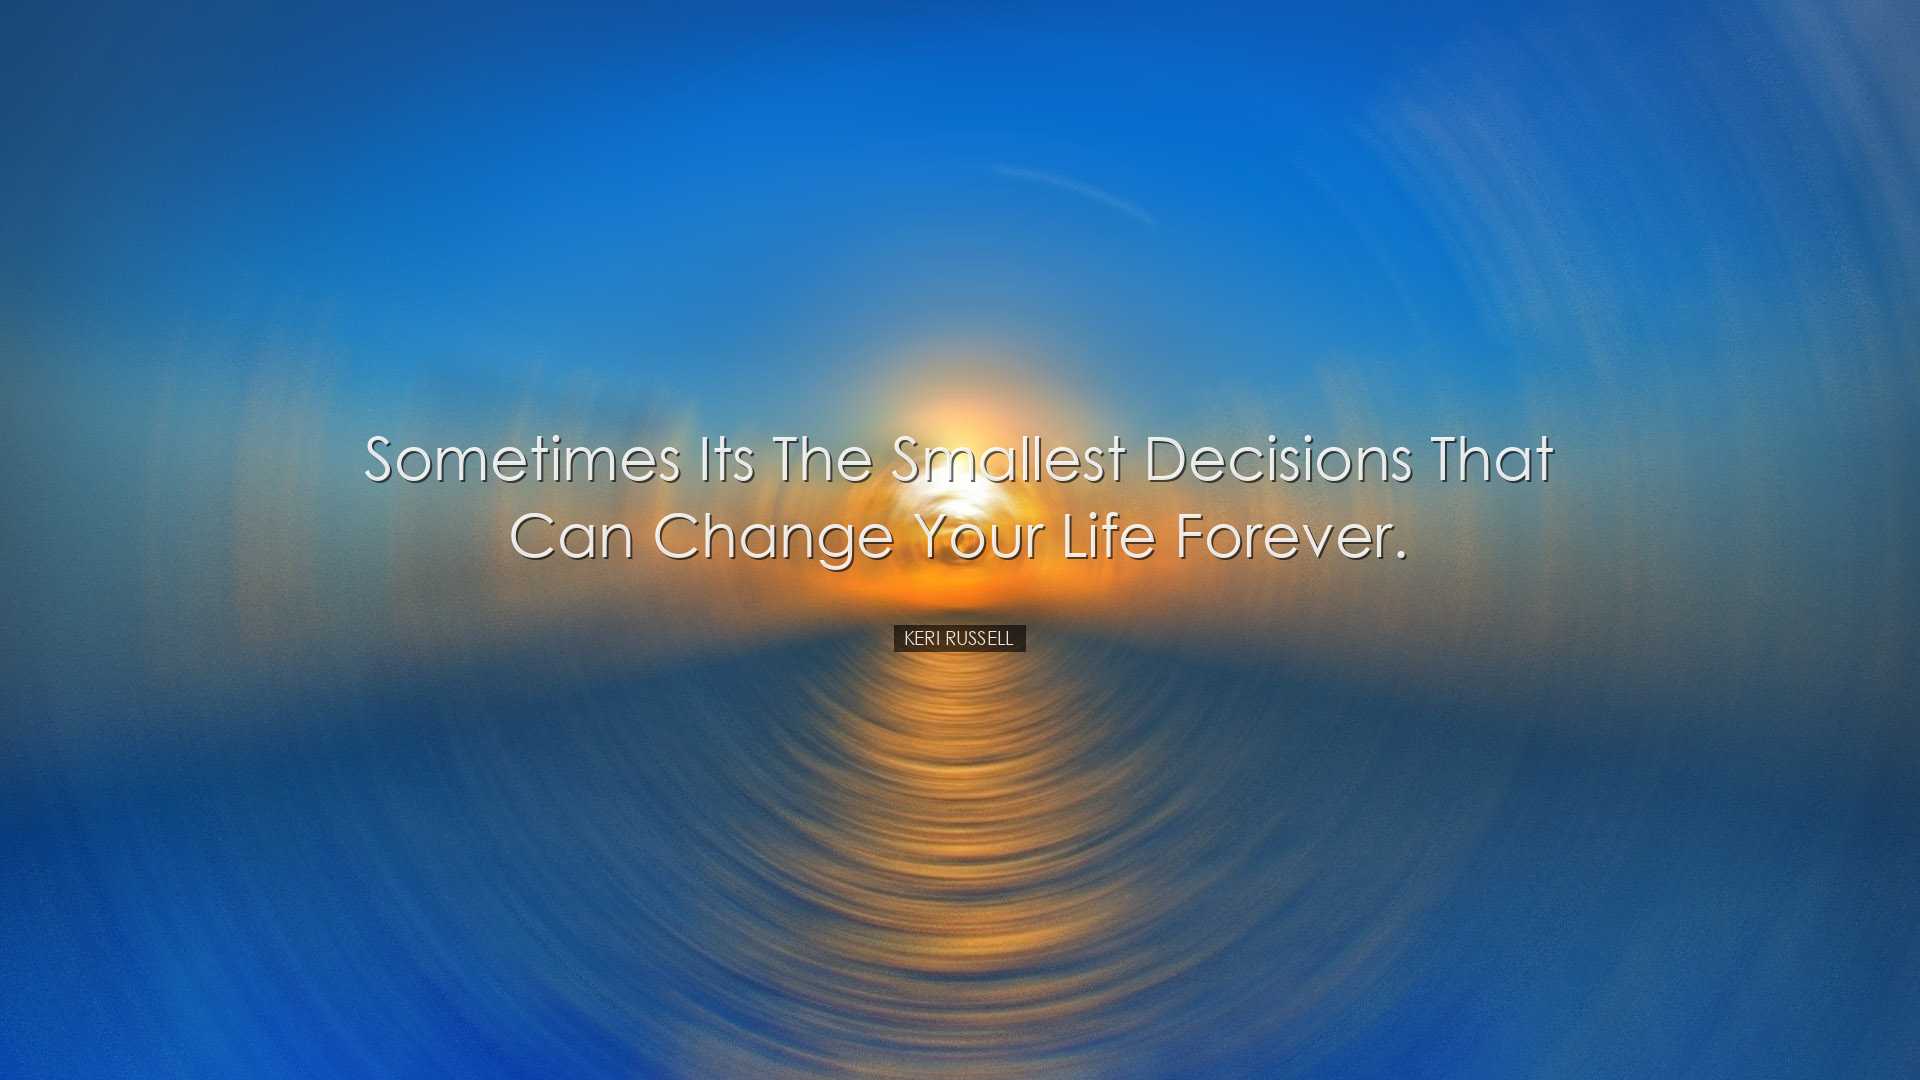 Sometimes its the smallest decisions that can change your life for